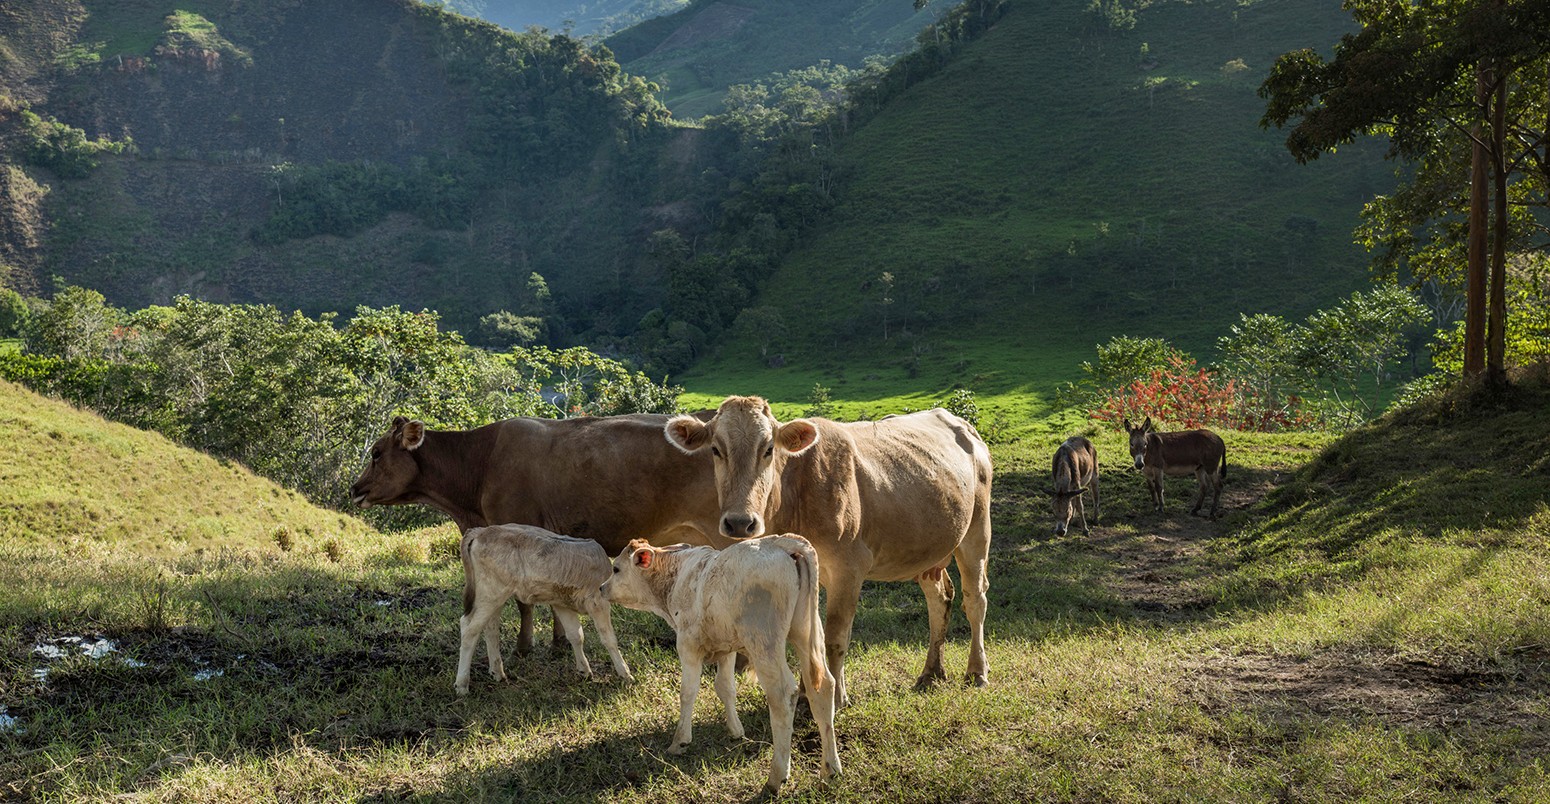 Cows in Pozuzo, city of the amazon rain forest.